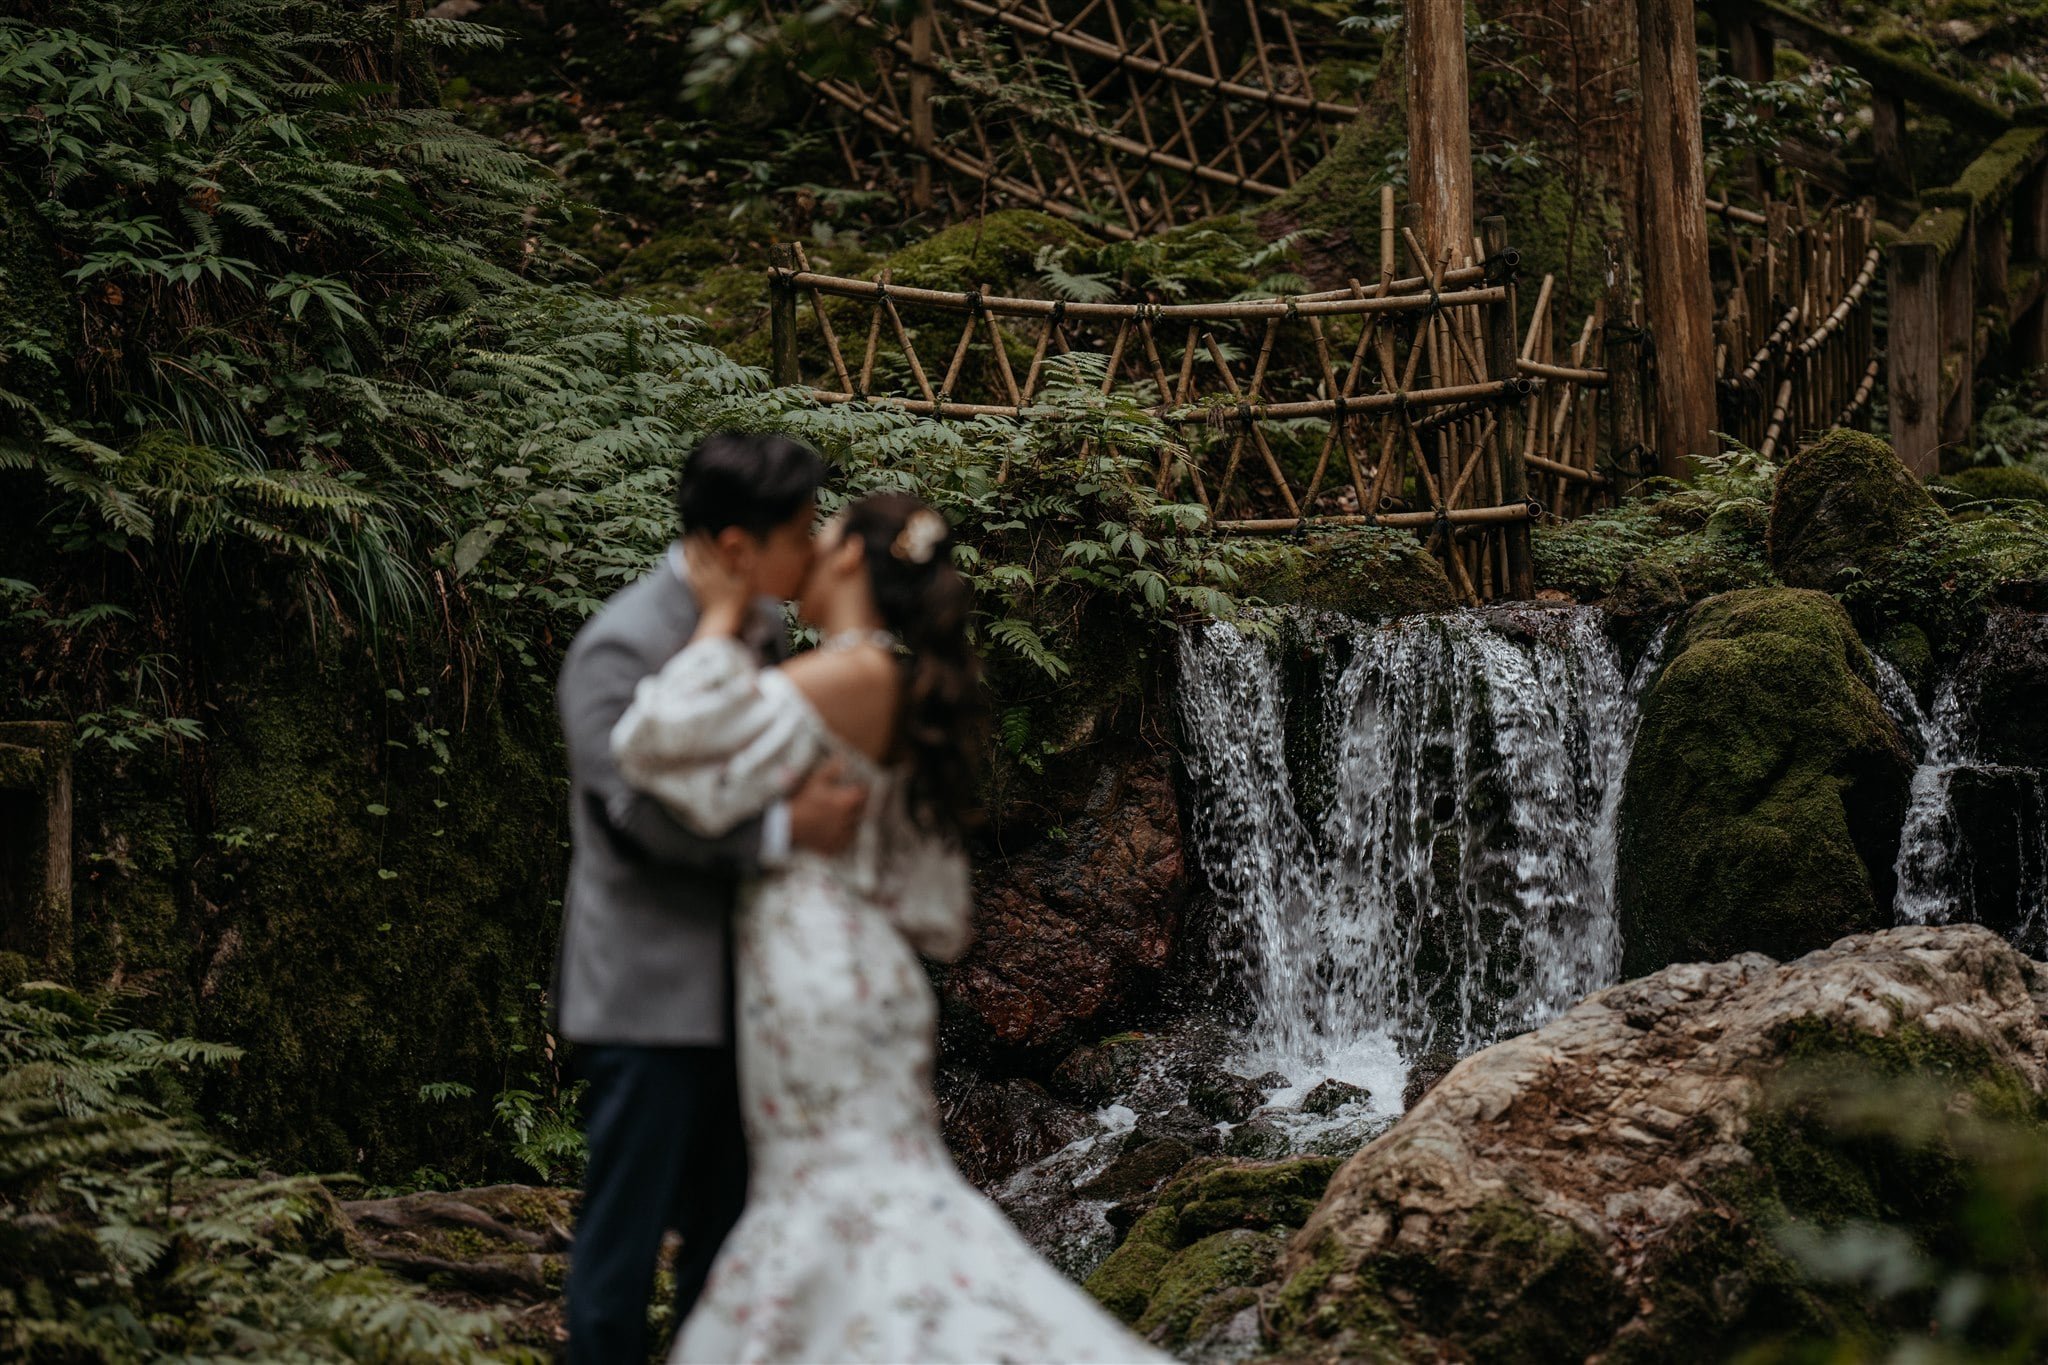 Bride and groom kiss in front of a waterfall in the forest for their Japan elopement portraits